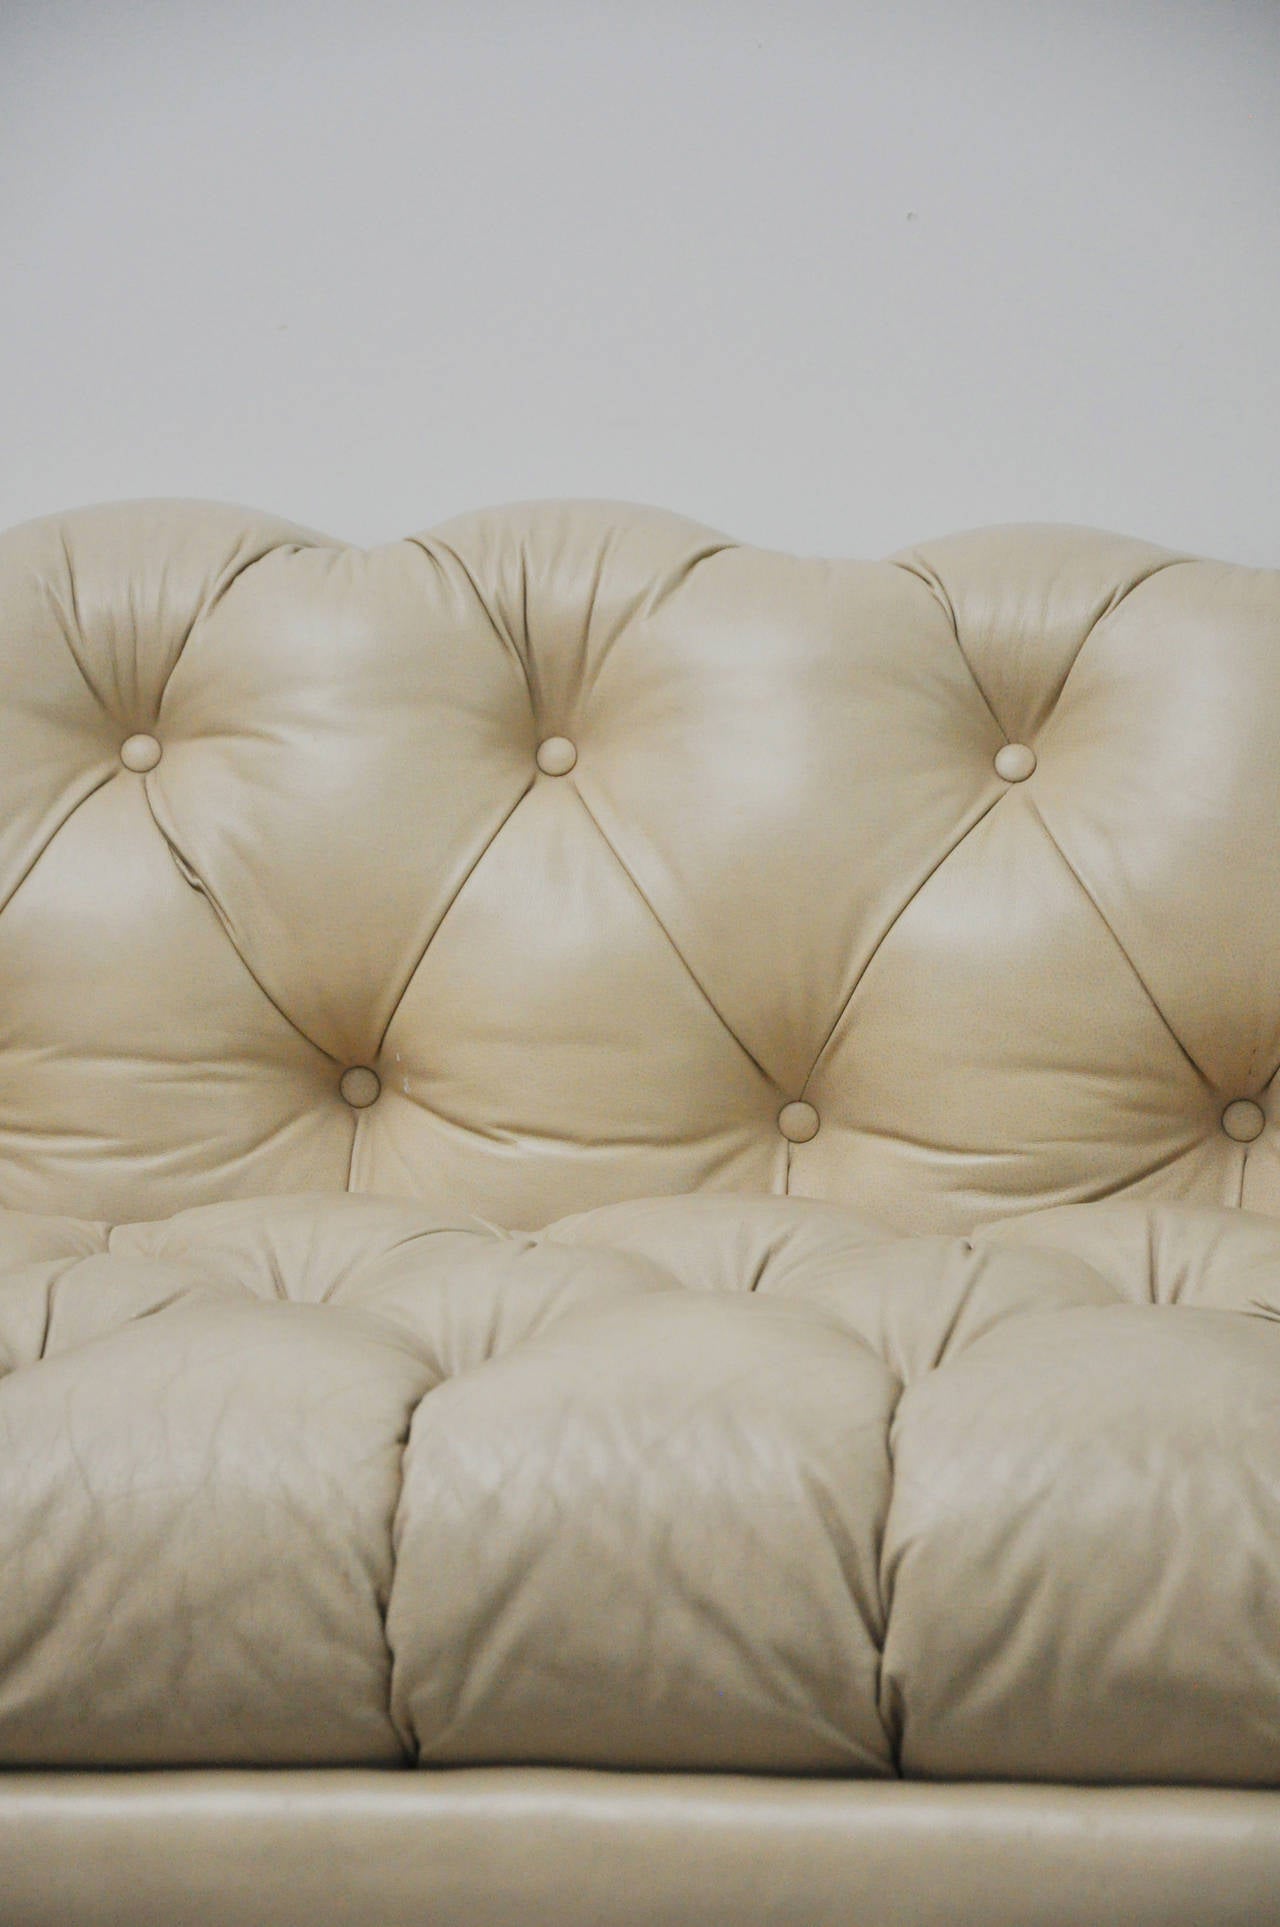 Two exquisite light tan leather Chesterfield style sofas with nailhead trim by Hancock and Moore. Comfortable and in beautiful condition. Leather is a tan off-white color.  Sold separately.